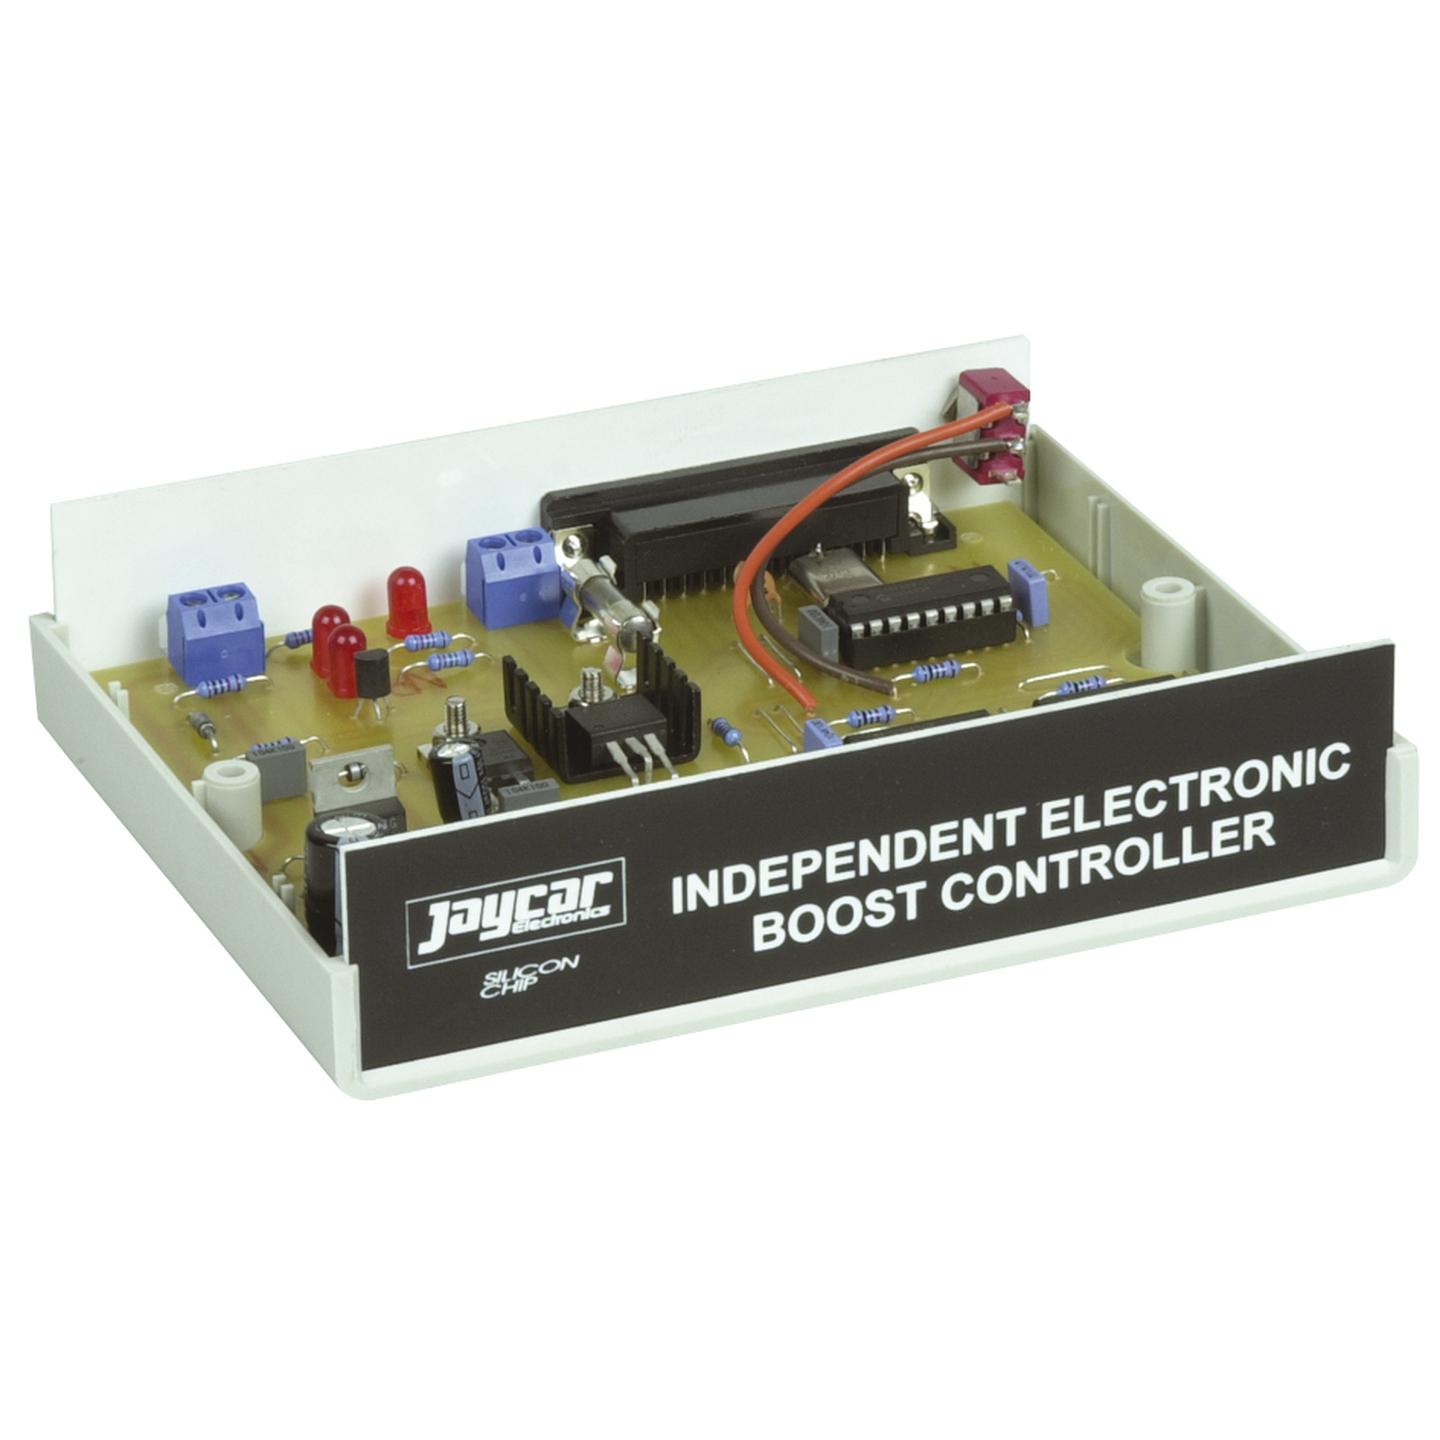 Independent Electronic Boost Controller Kit Back Catalogue